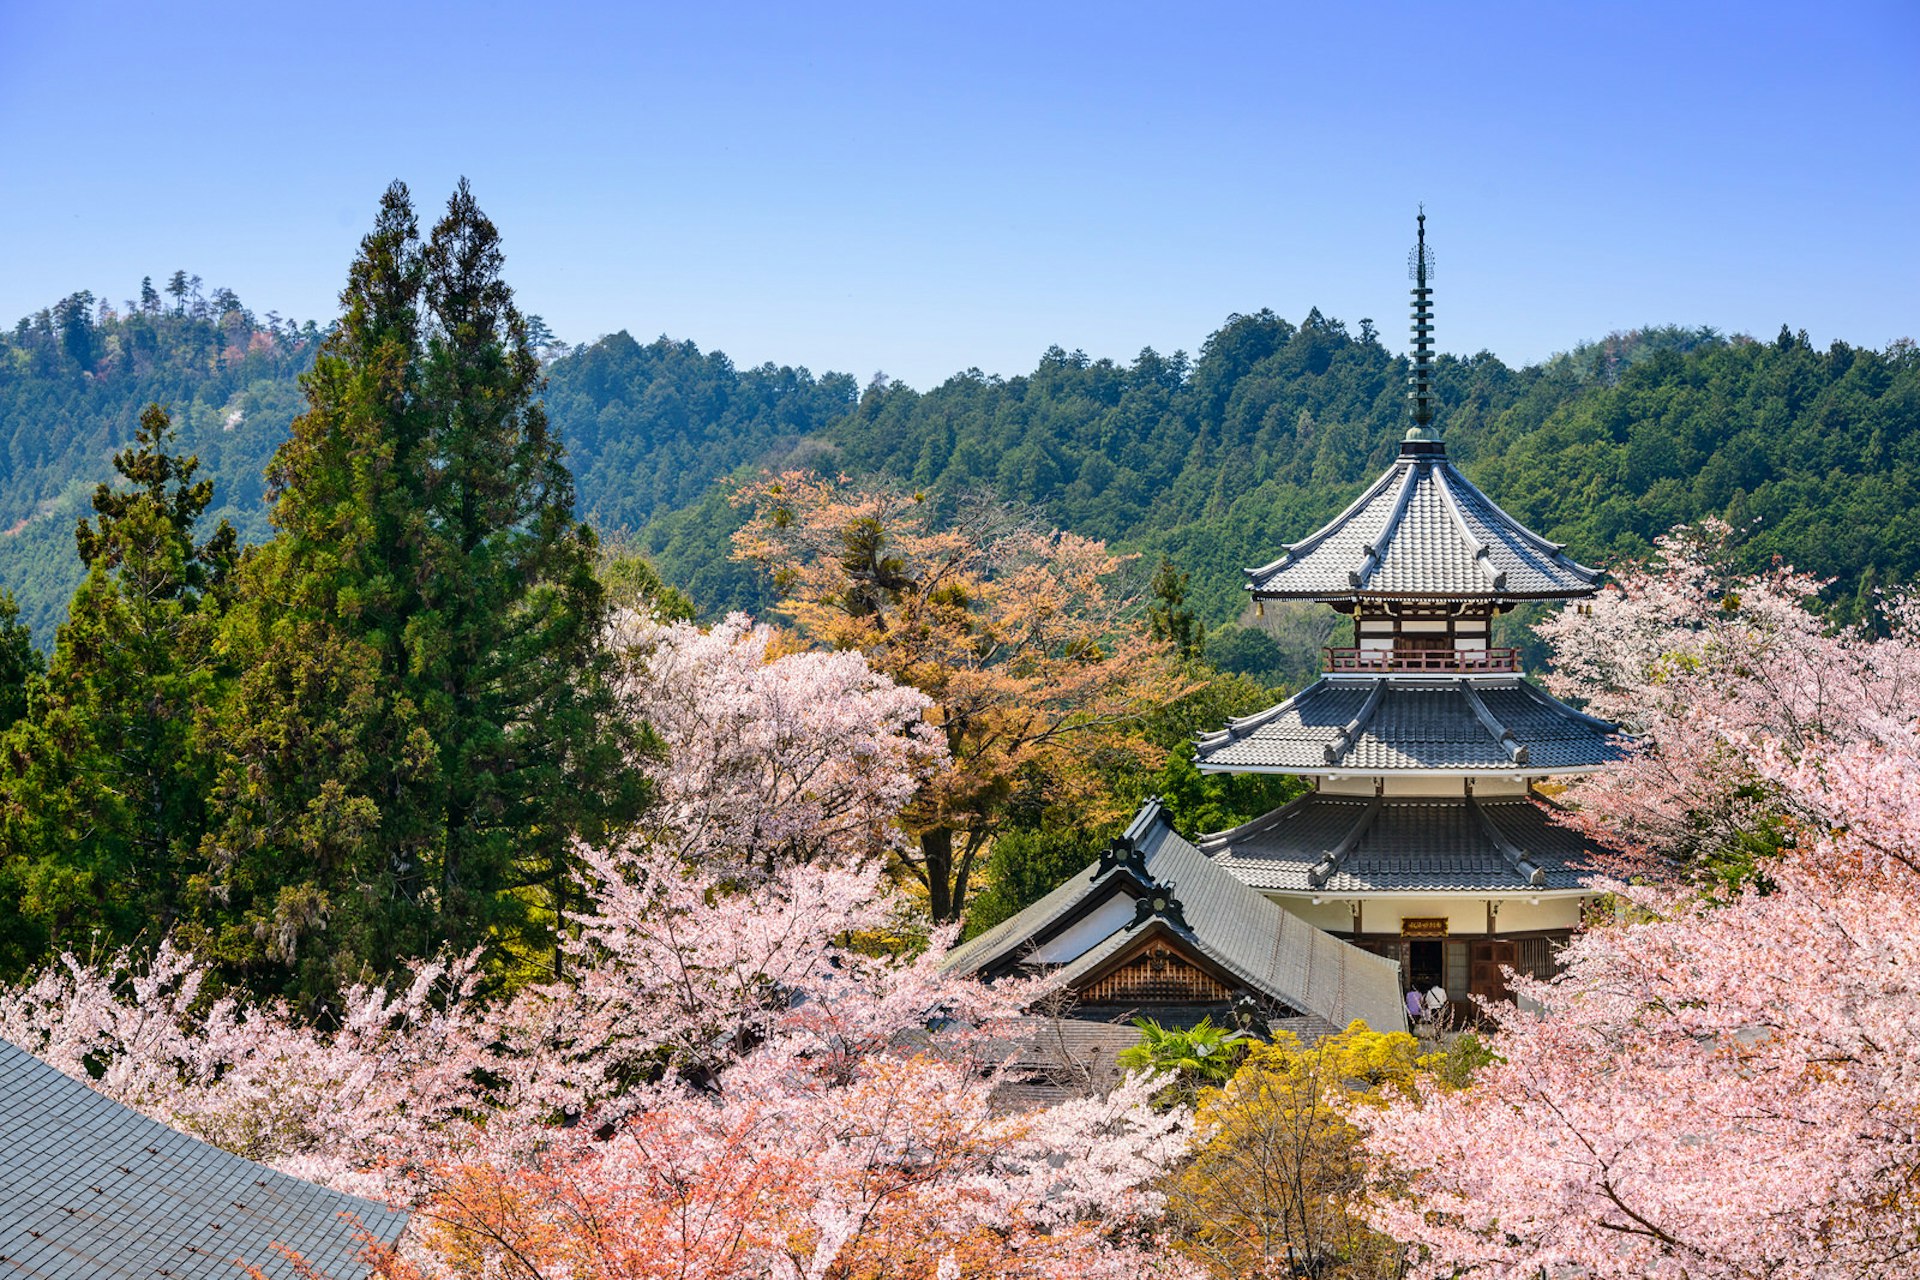 View of the pagoda of temple Kimpusen-ji surrounded by pink cherry blossoms and greenery in Yoshino © Sean Pavone / Shutterstock